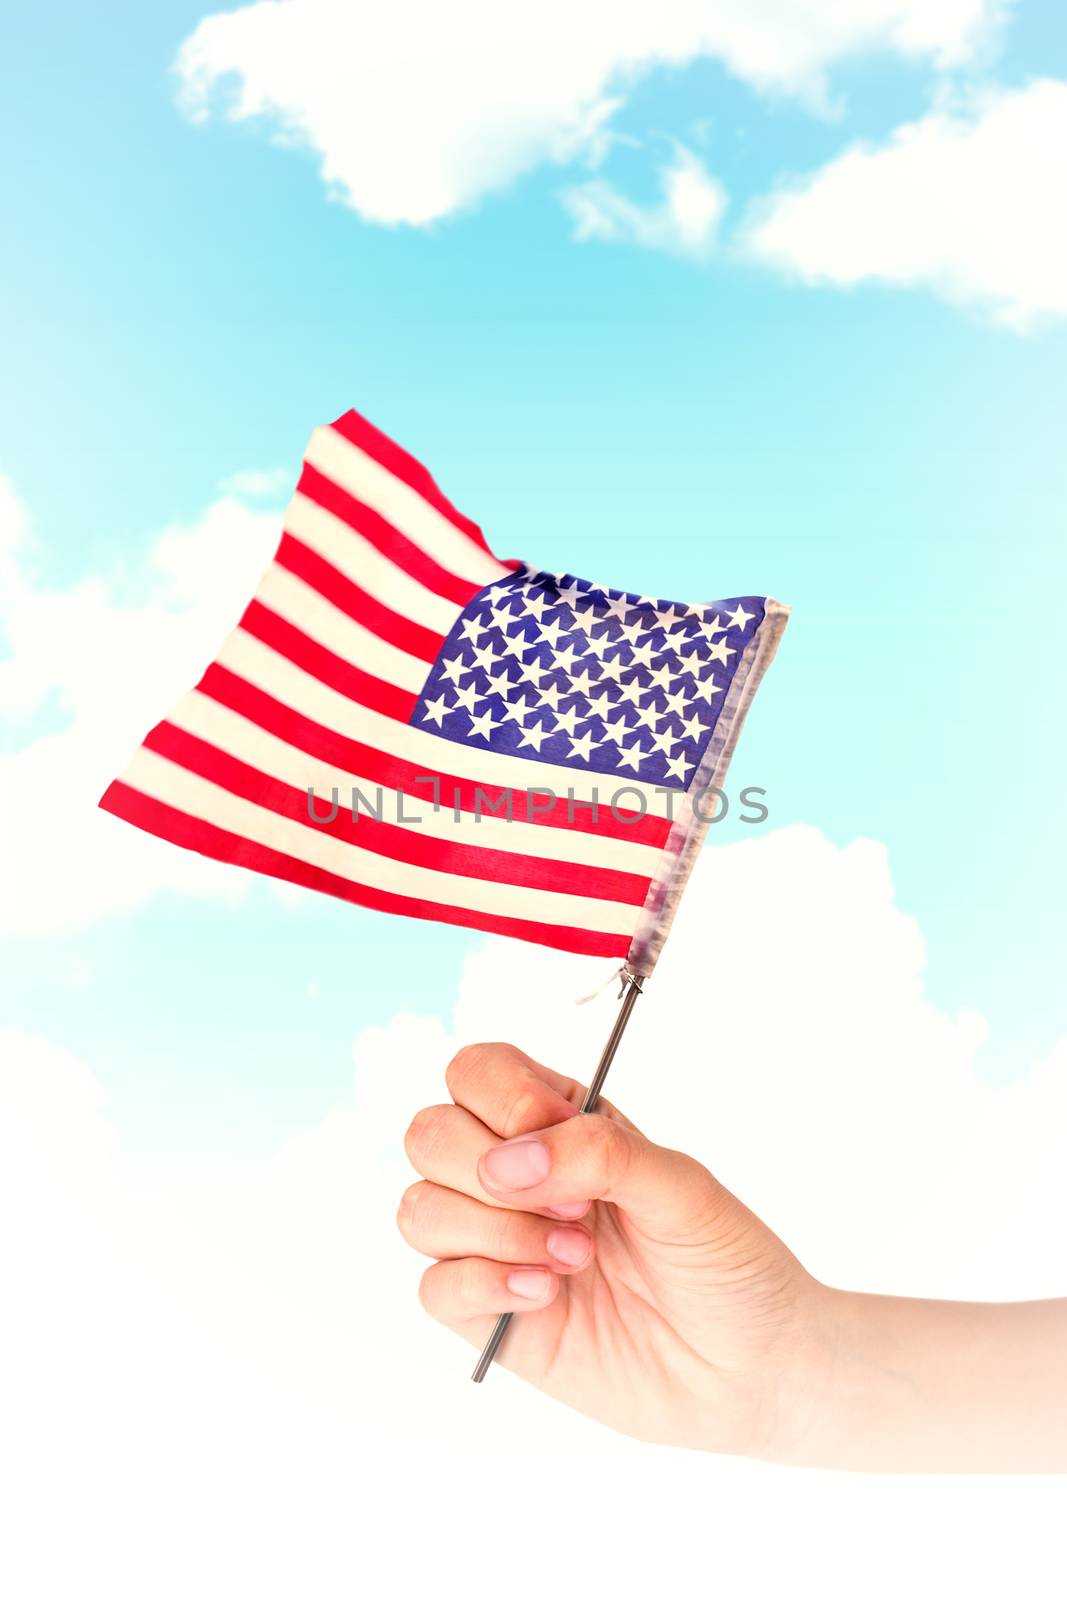 Composite image of hand waving american flag by Wavebreakmedia